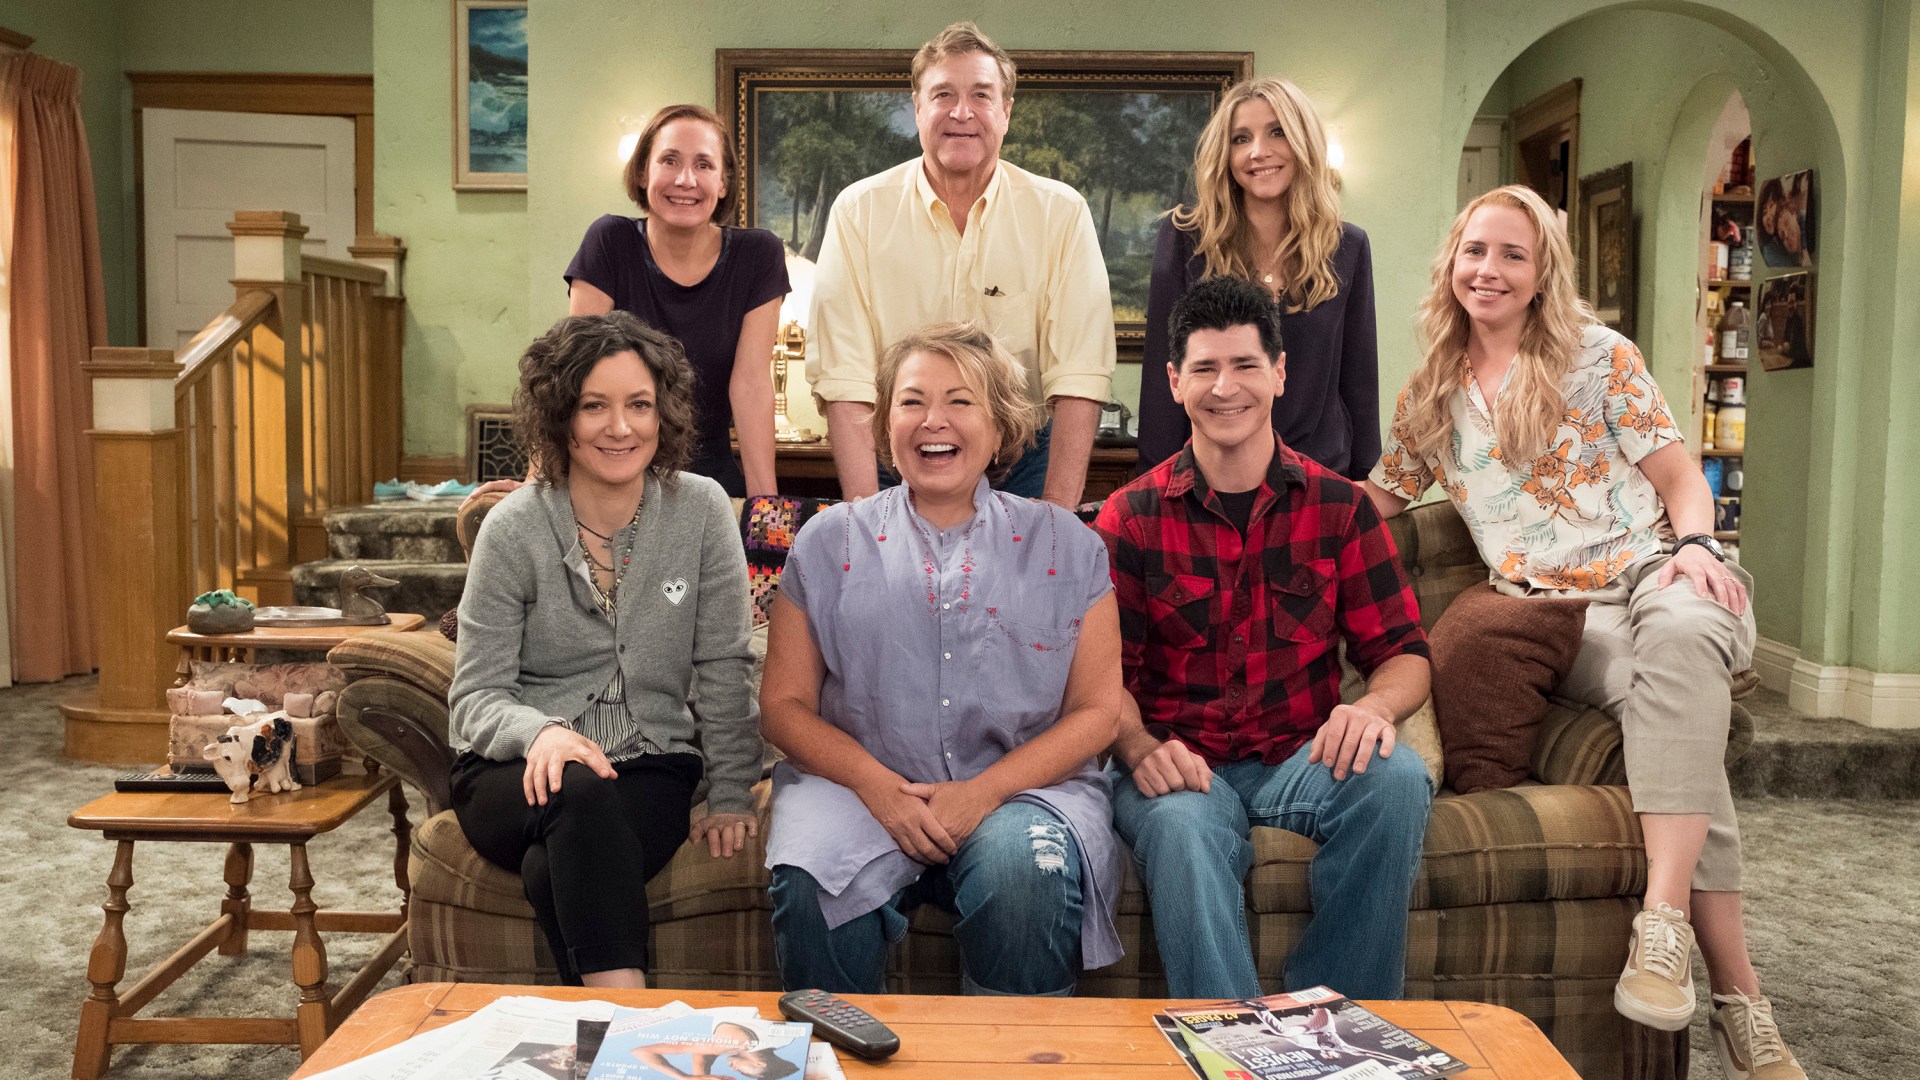 New Roseanne Trailer Premieres During 2018 Oscars — Watch the Clip!